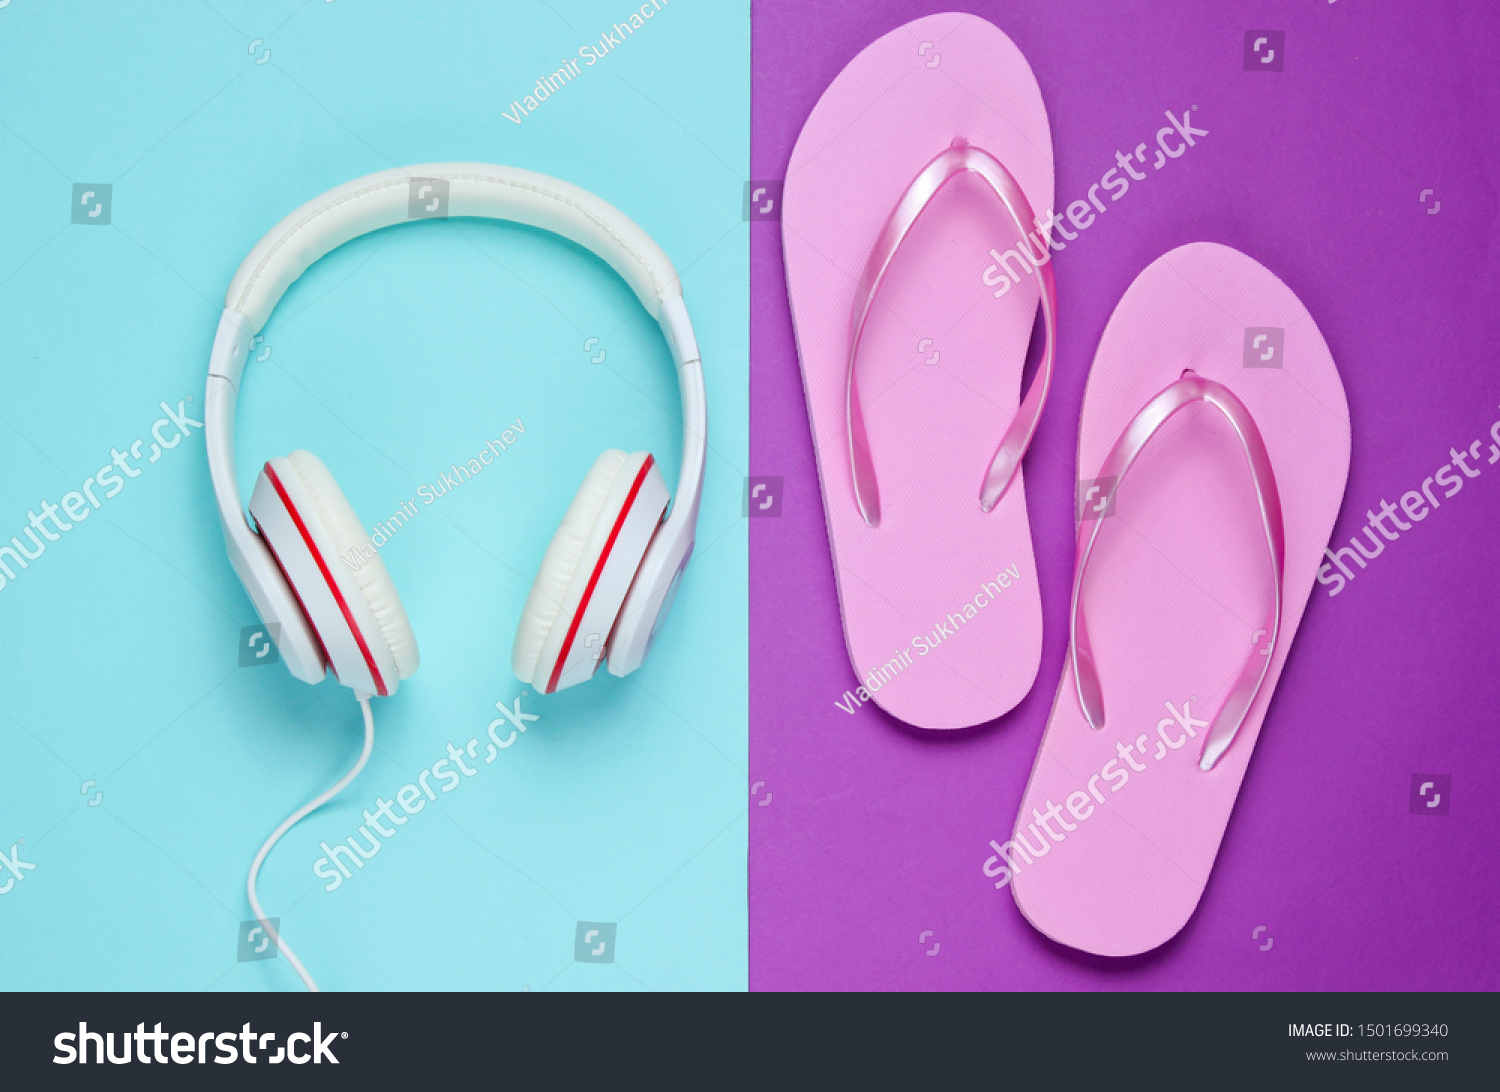 Flip flop and headphones on colored background.  Summertime relax. Summer vacation. Beauty and fashion. Top view. Flat lay #1501699340